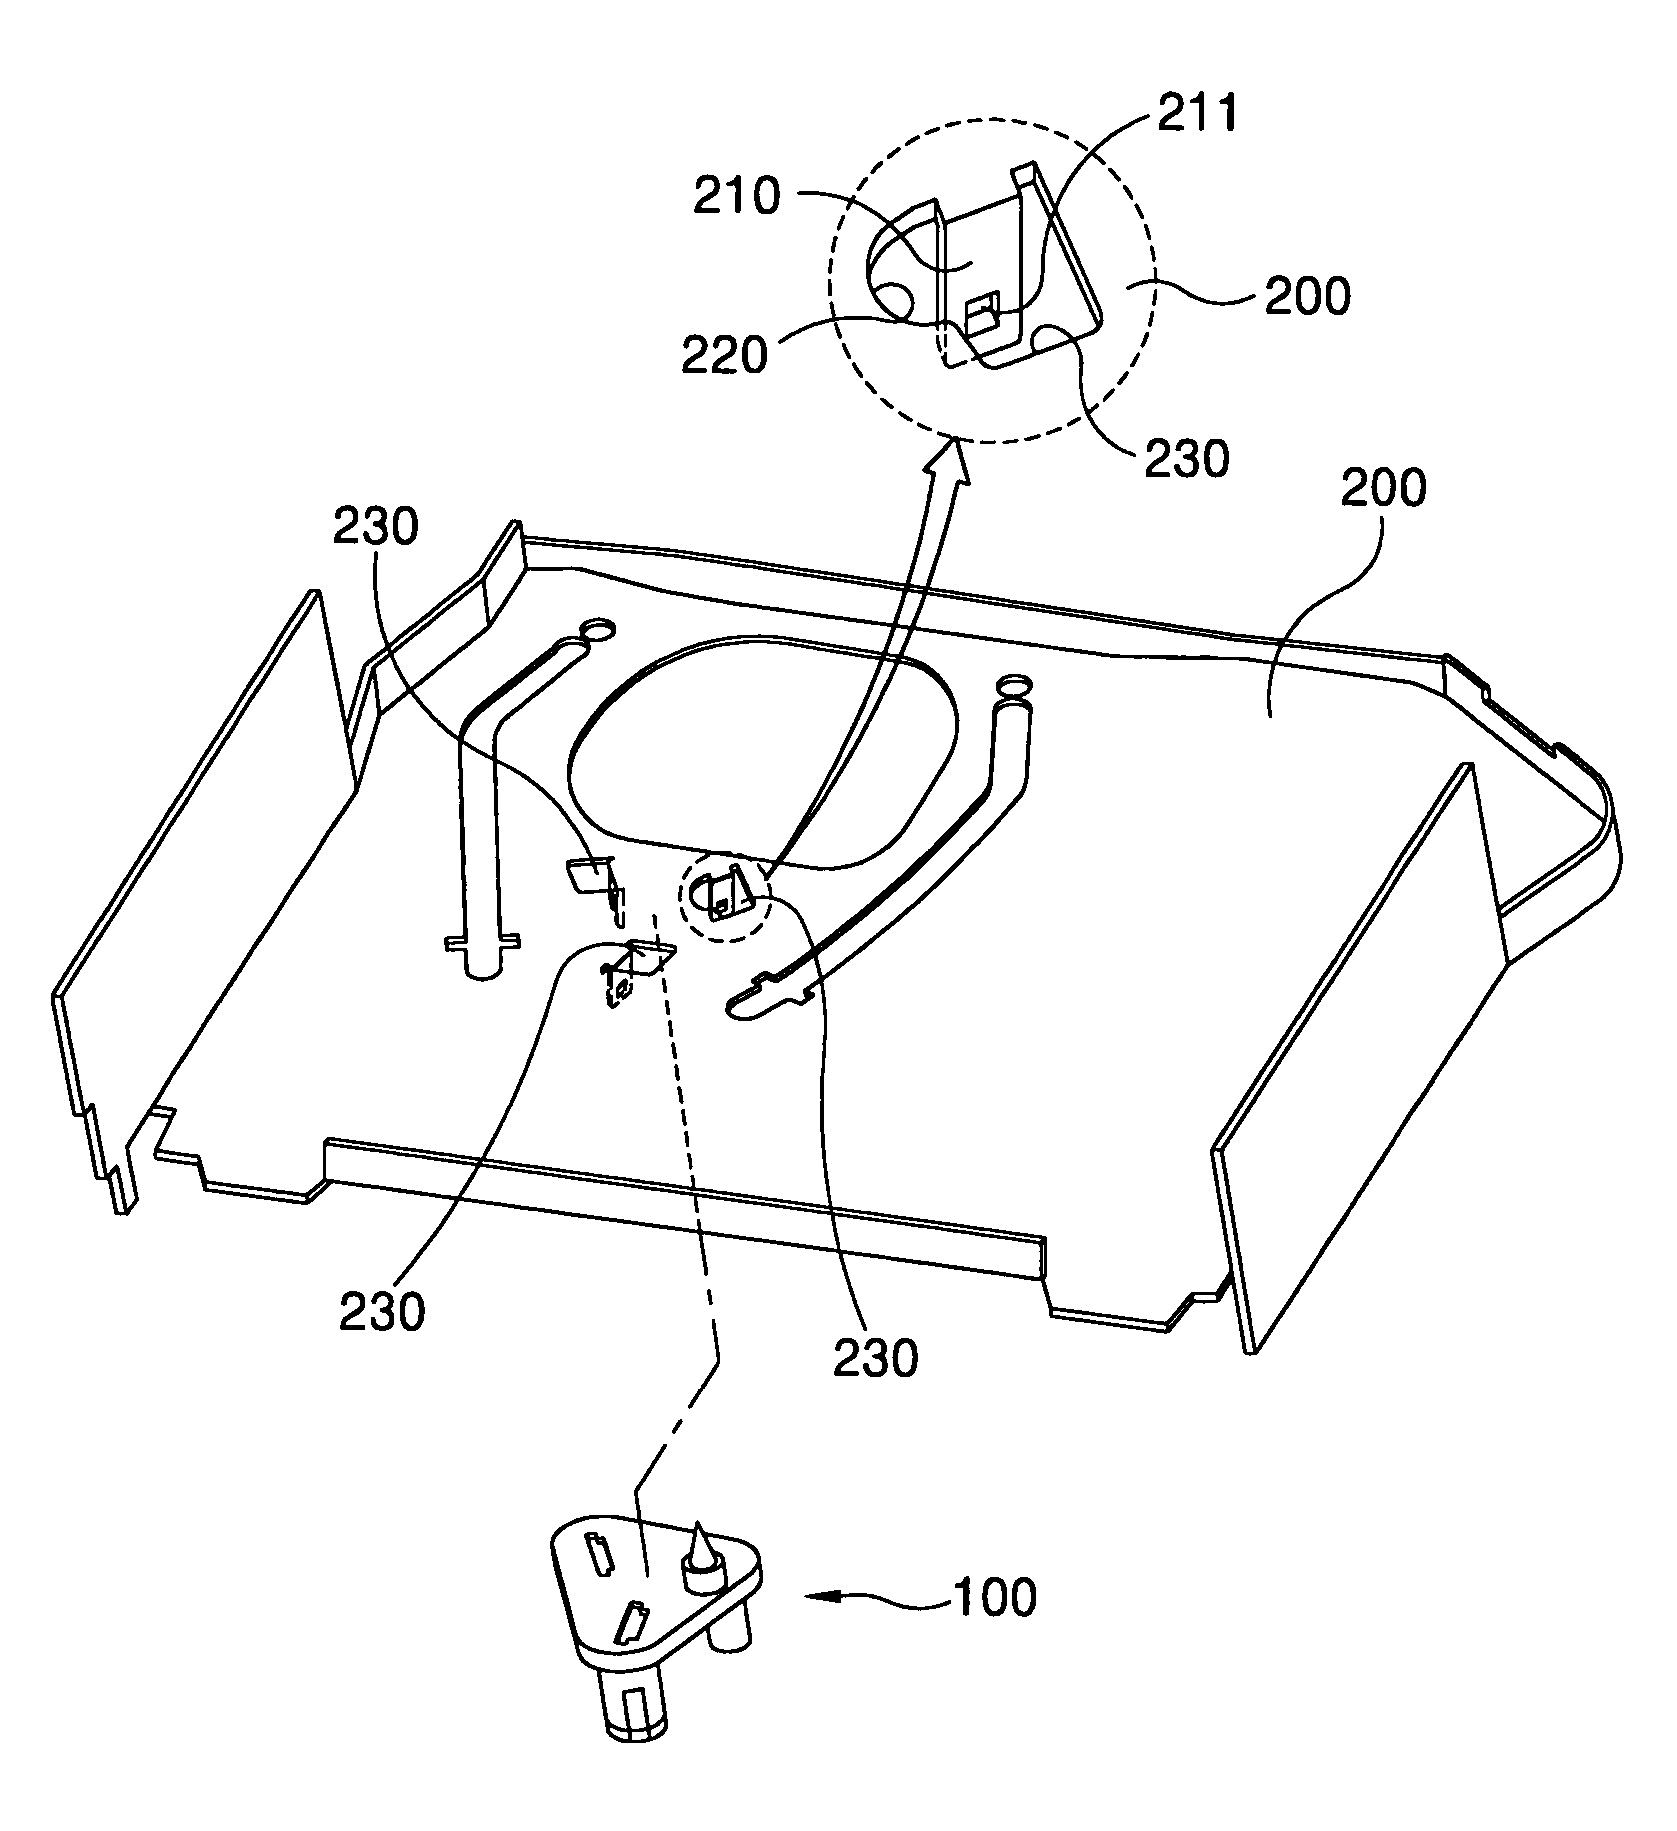 Loading gear supporting apparatus of video cassette recorder